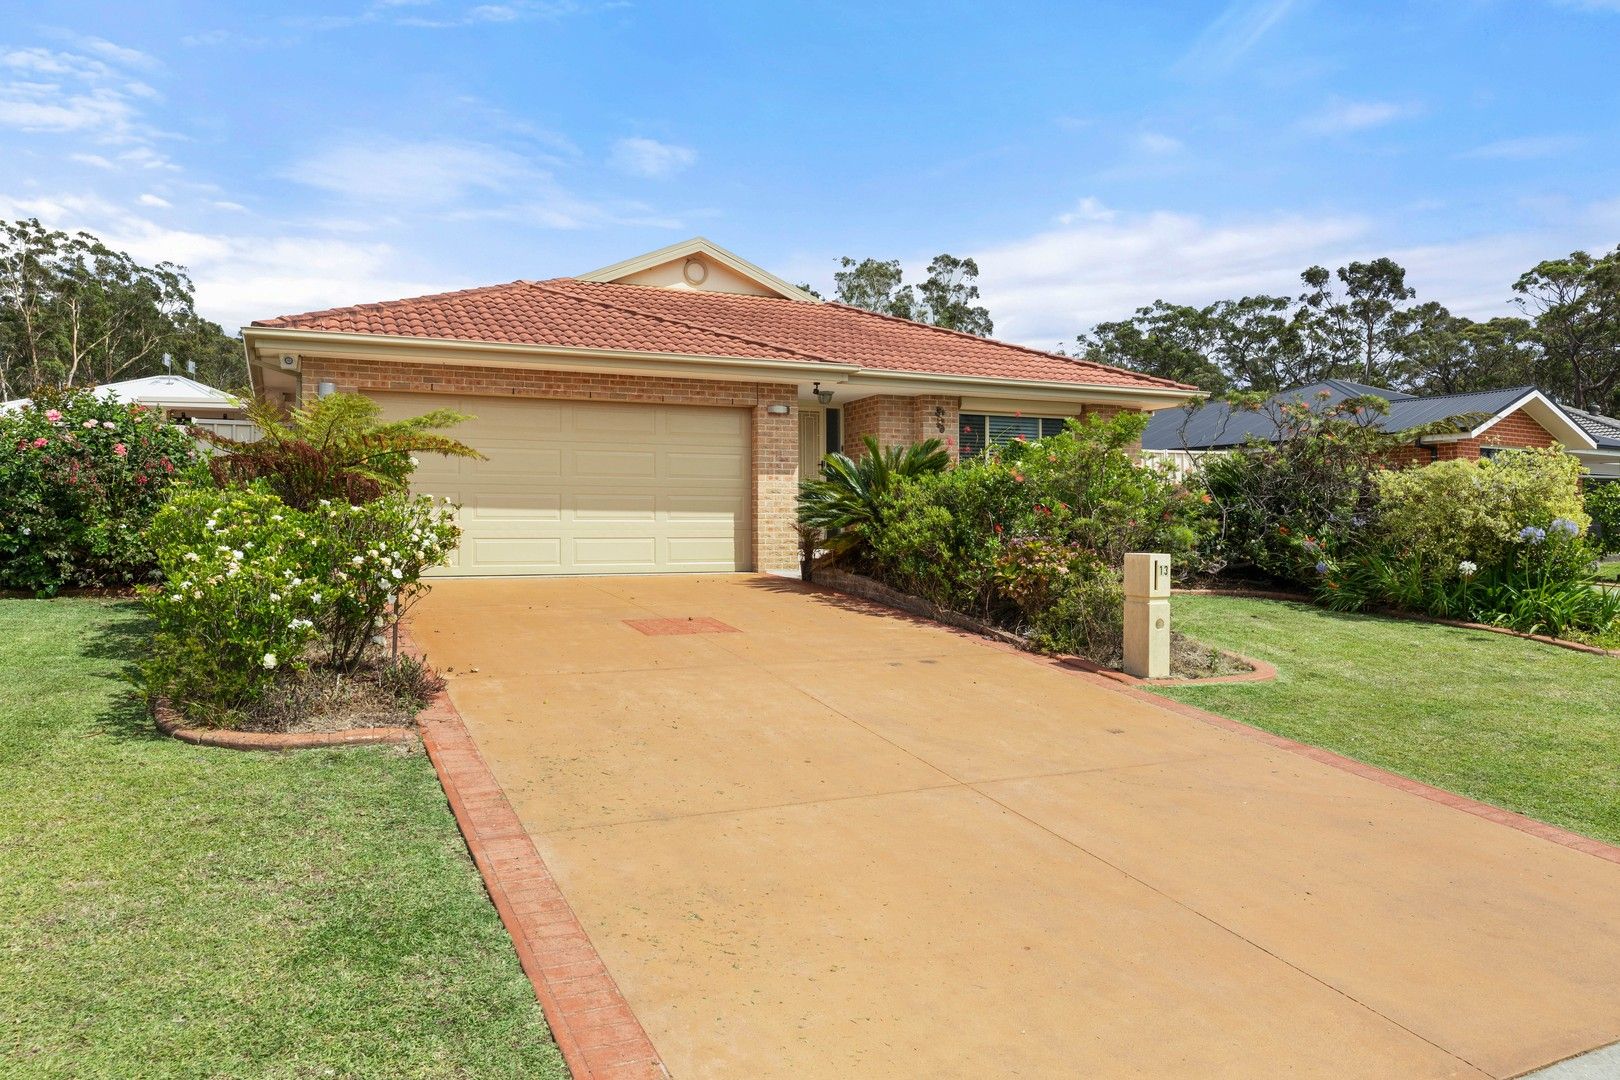 4 bedrooms House in 13 Yallara Crescent SANCTUARY POINT NSW, 2540